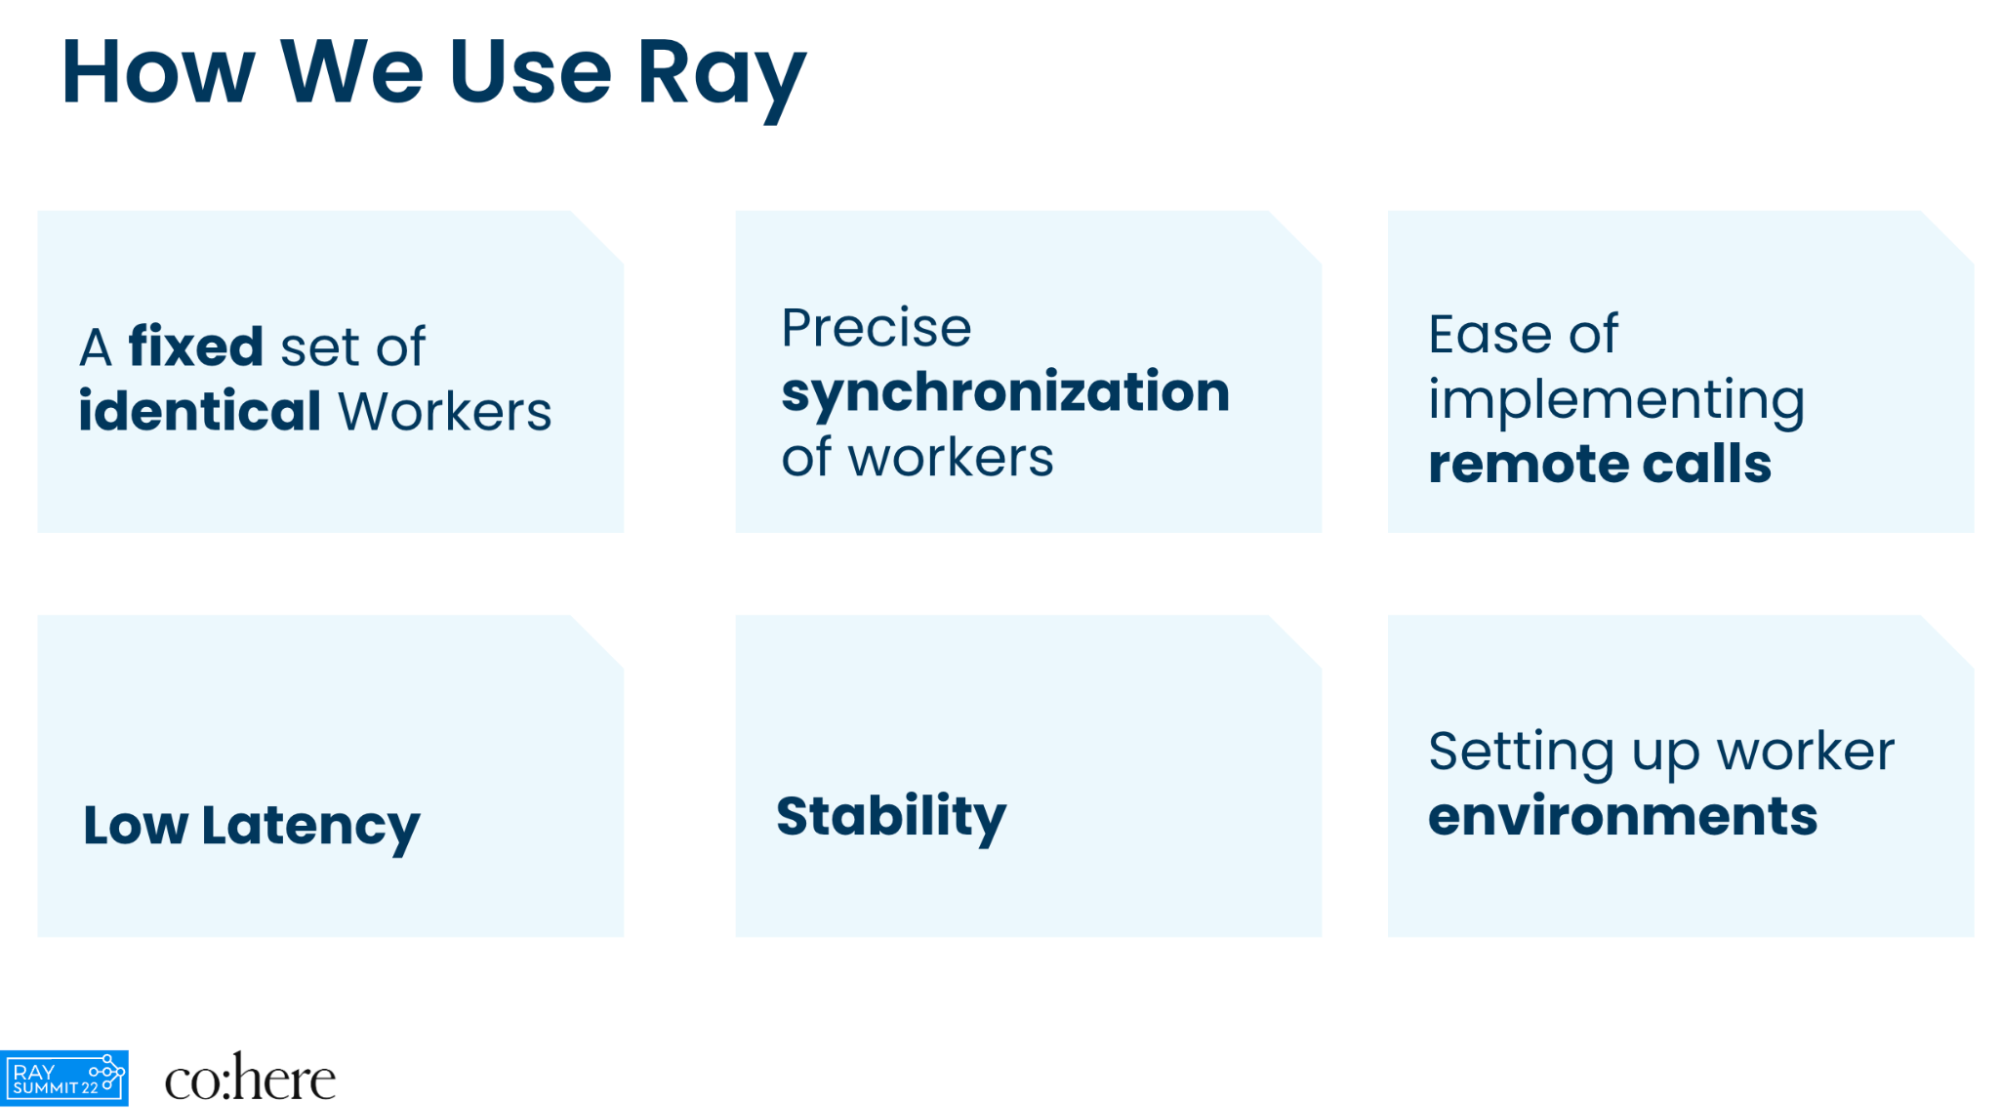 Cohere - How we use ray